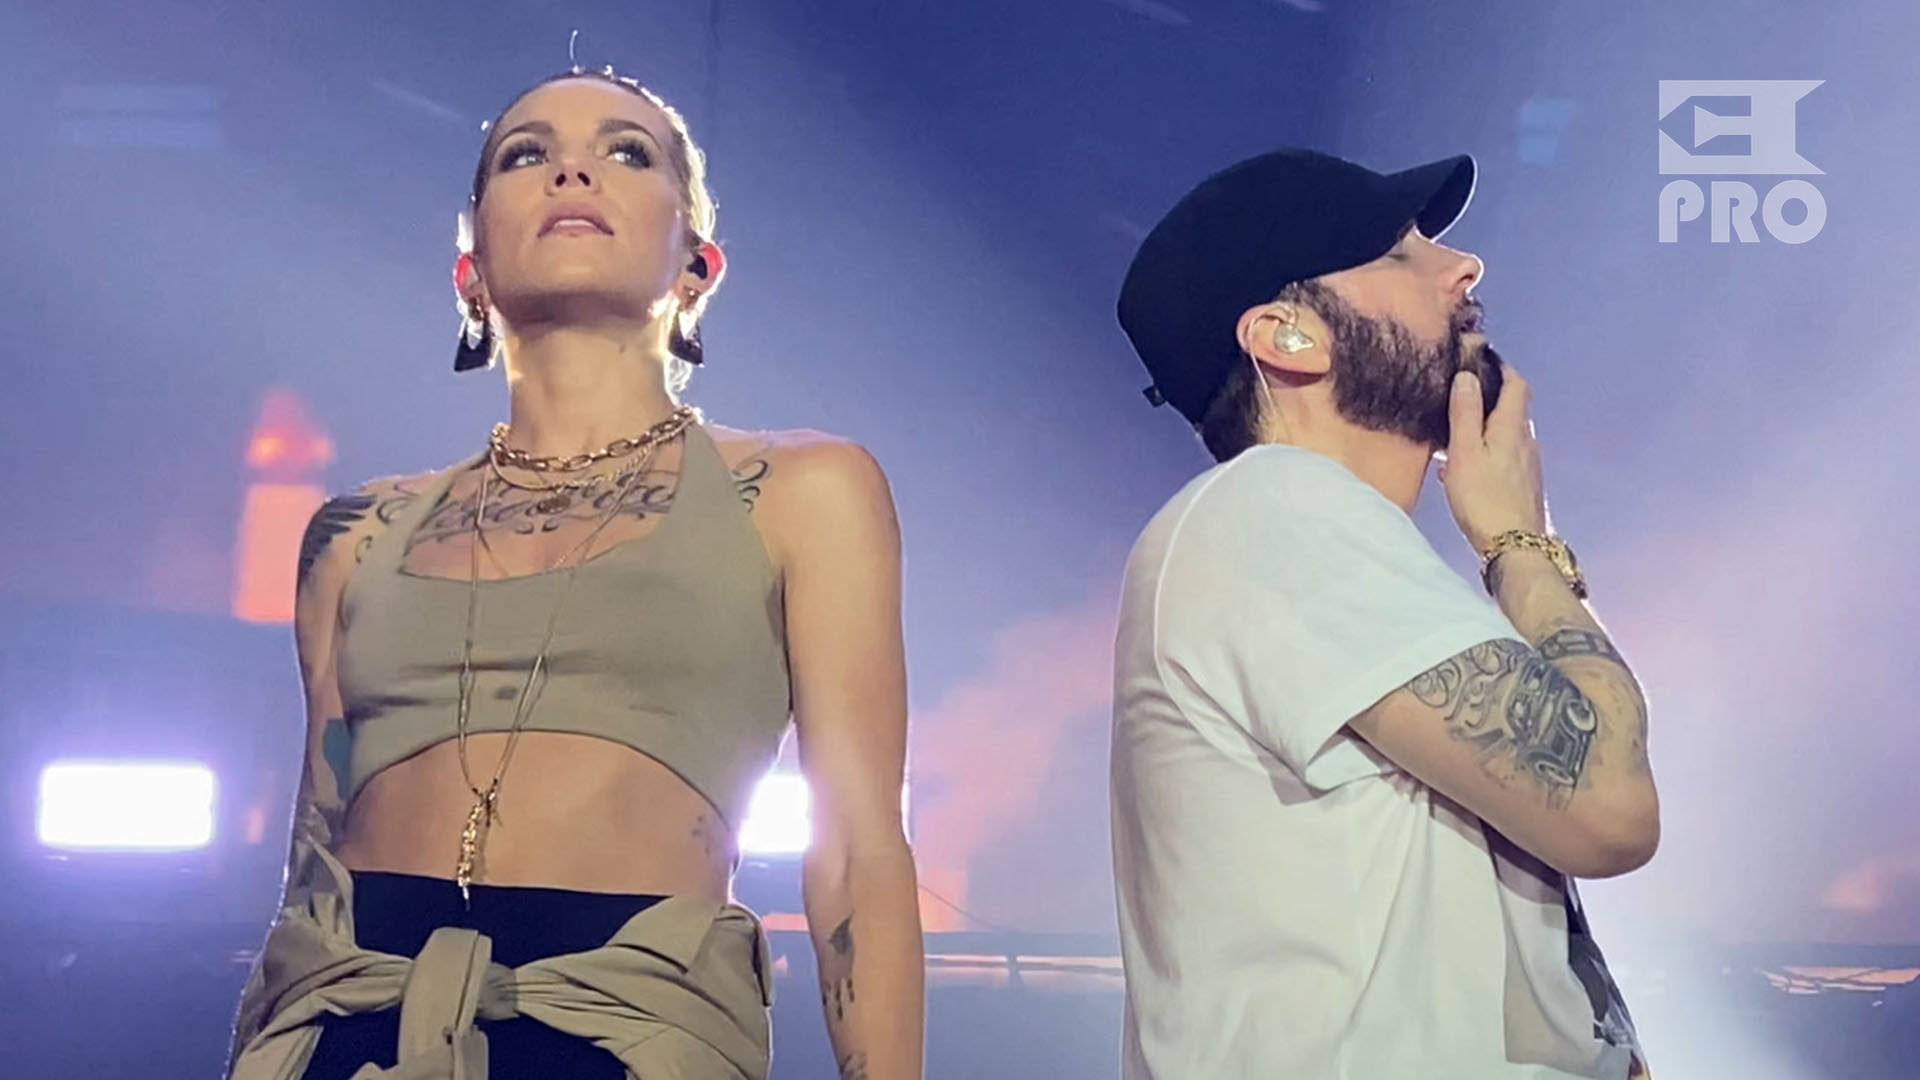 1920x1080 Skylar Grey Speaks On Creative Partnership With Eminem In New Interview | the biggest and most trusted source of Eminem